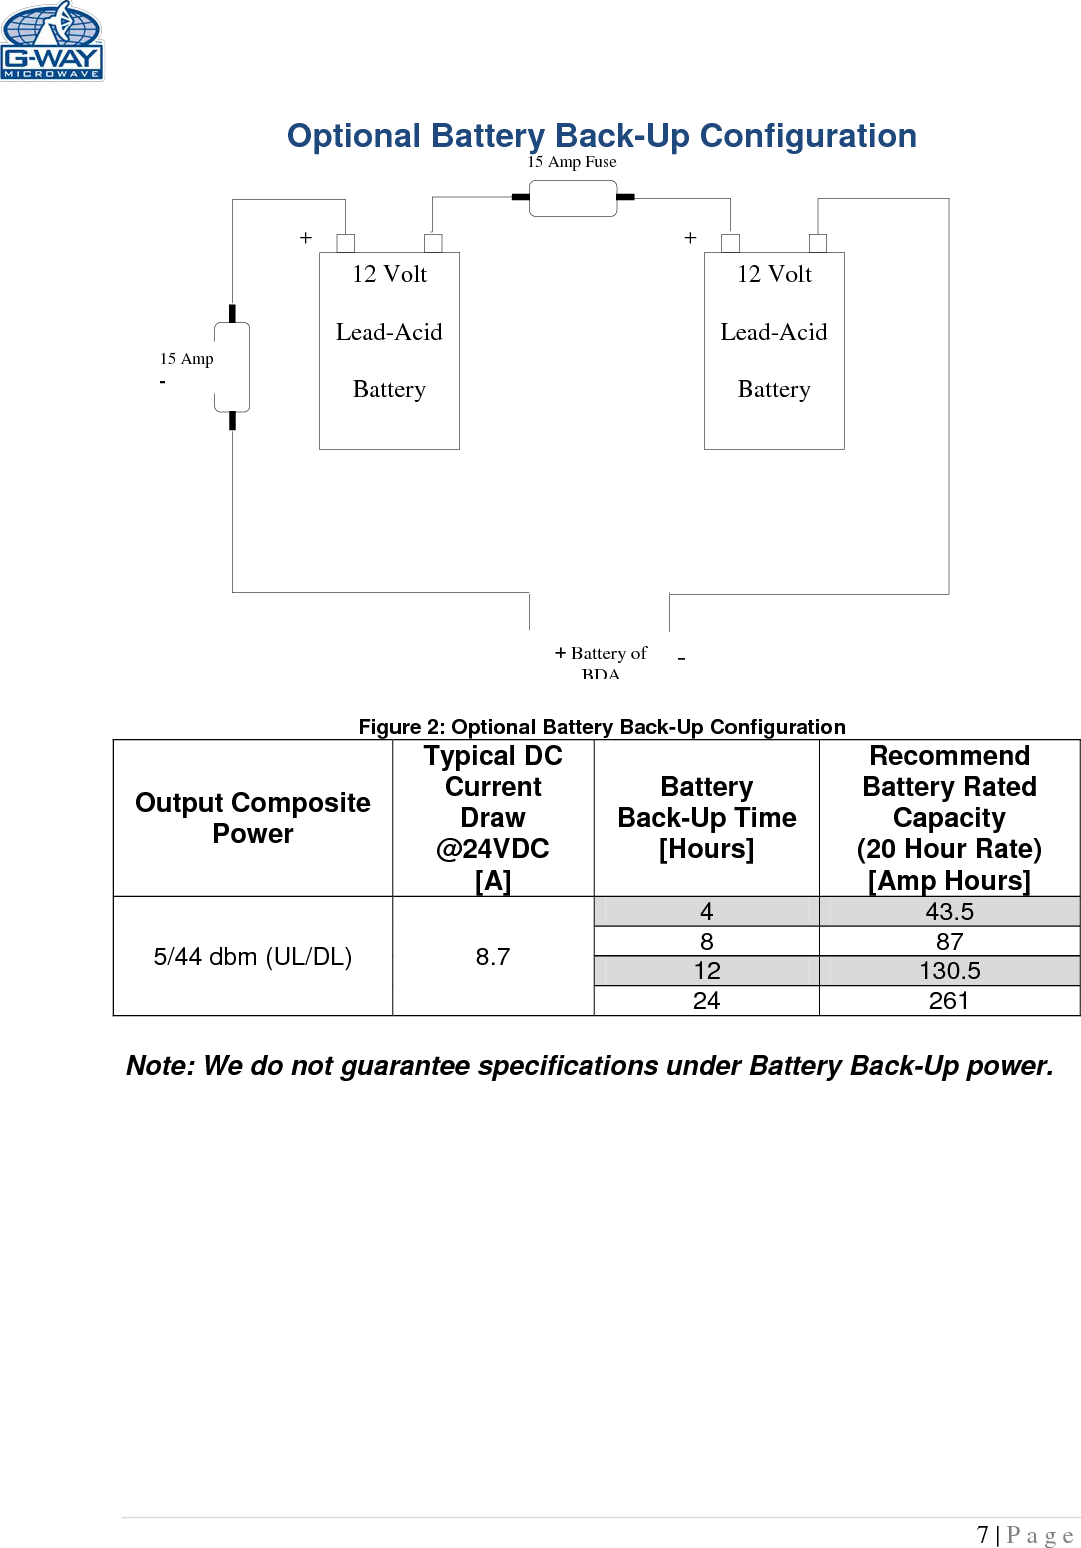   7 | Page  15 Amp Fuse 15 Amp -       12 Volt  Lead-Acid  Battery  12 Volt  Lead-Acid  Battery  + + + Battery of  BDA -  Optional Battery Back-Up Configuration                  Figure 2: Optional Battery Back-Up Configuration Output Composite Power Typical DC Current  Draw @24VDC [A] Battery Back-Up Time [Hours] Recommend Battery Rated Capacity (20 Hour Rate) [Amp Hours] 5/44 dbm (UL/DL)  8.7 4 43.5 8 87 12 130.5 24 261  Note: We do not guarantee specifications under Battery Back-Up power.            